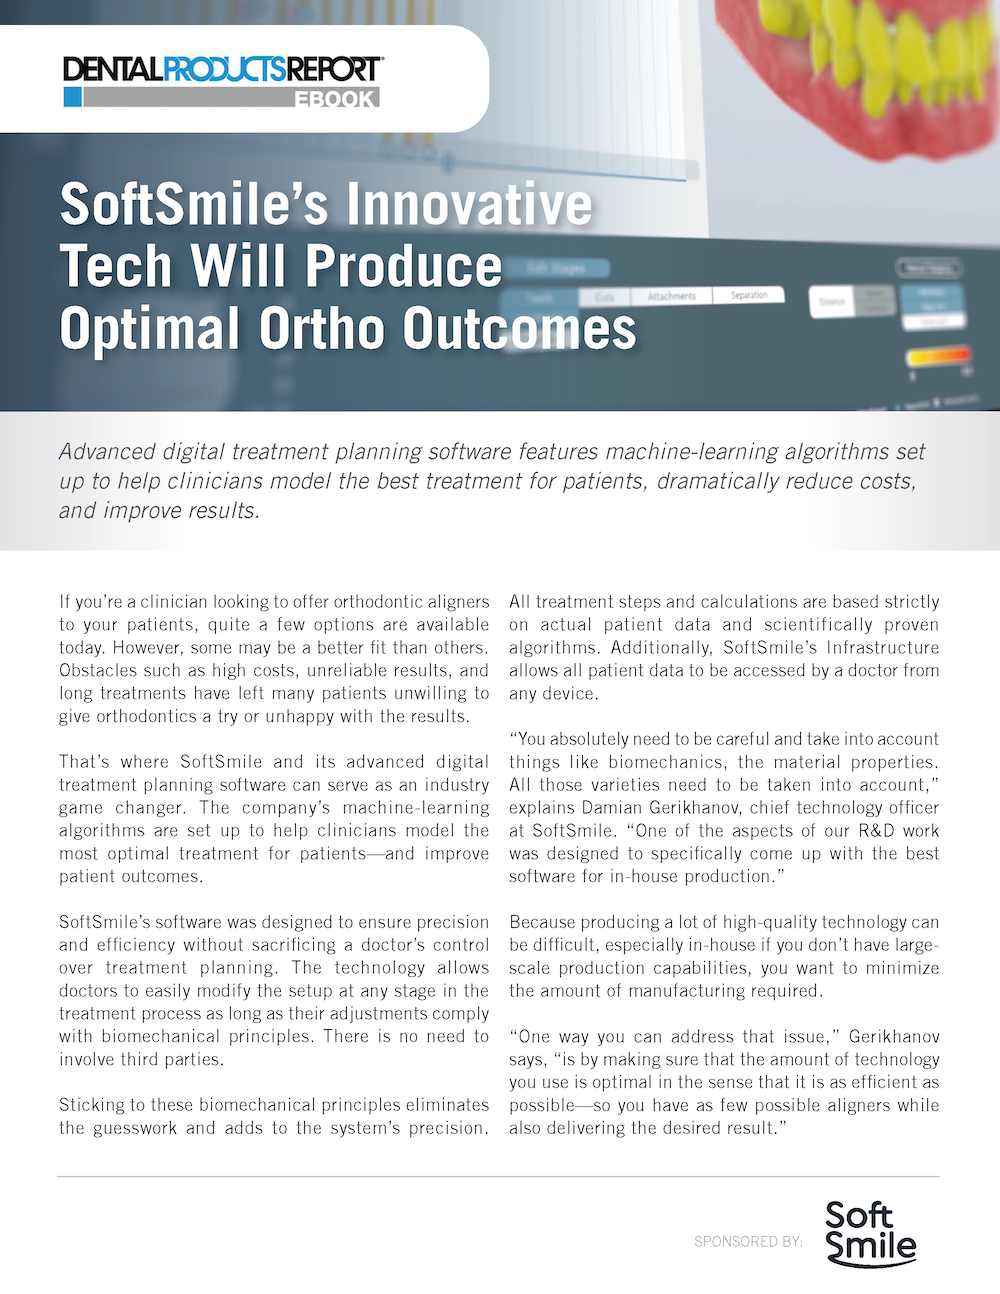 Free E-Book: SoftSmile’s Innovative Tech Will Produce Optimal Ortho Outcomes